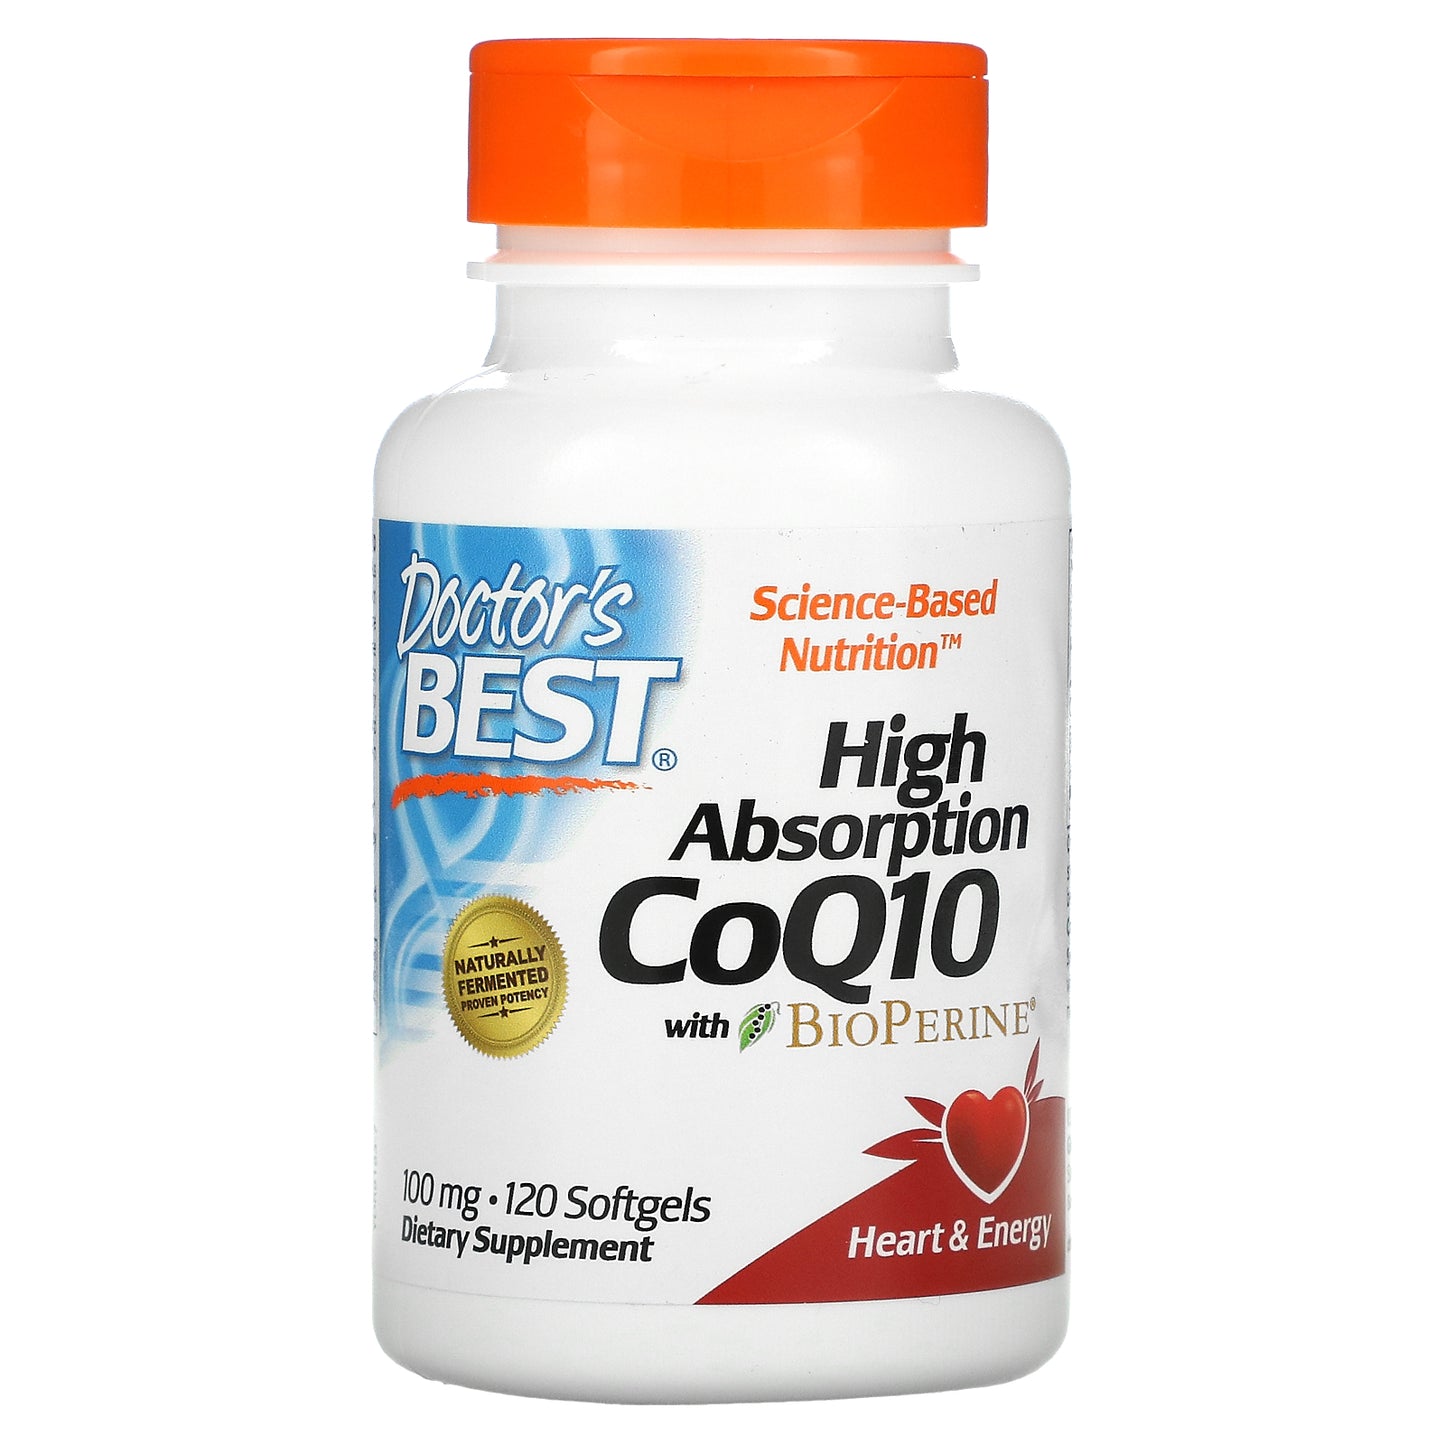 Doctor's Best High Absorption CoQ10 with BioPerine, 100 mg, 120 Softgels